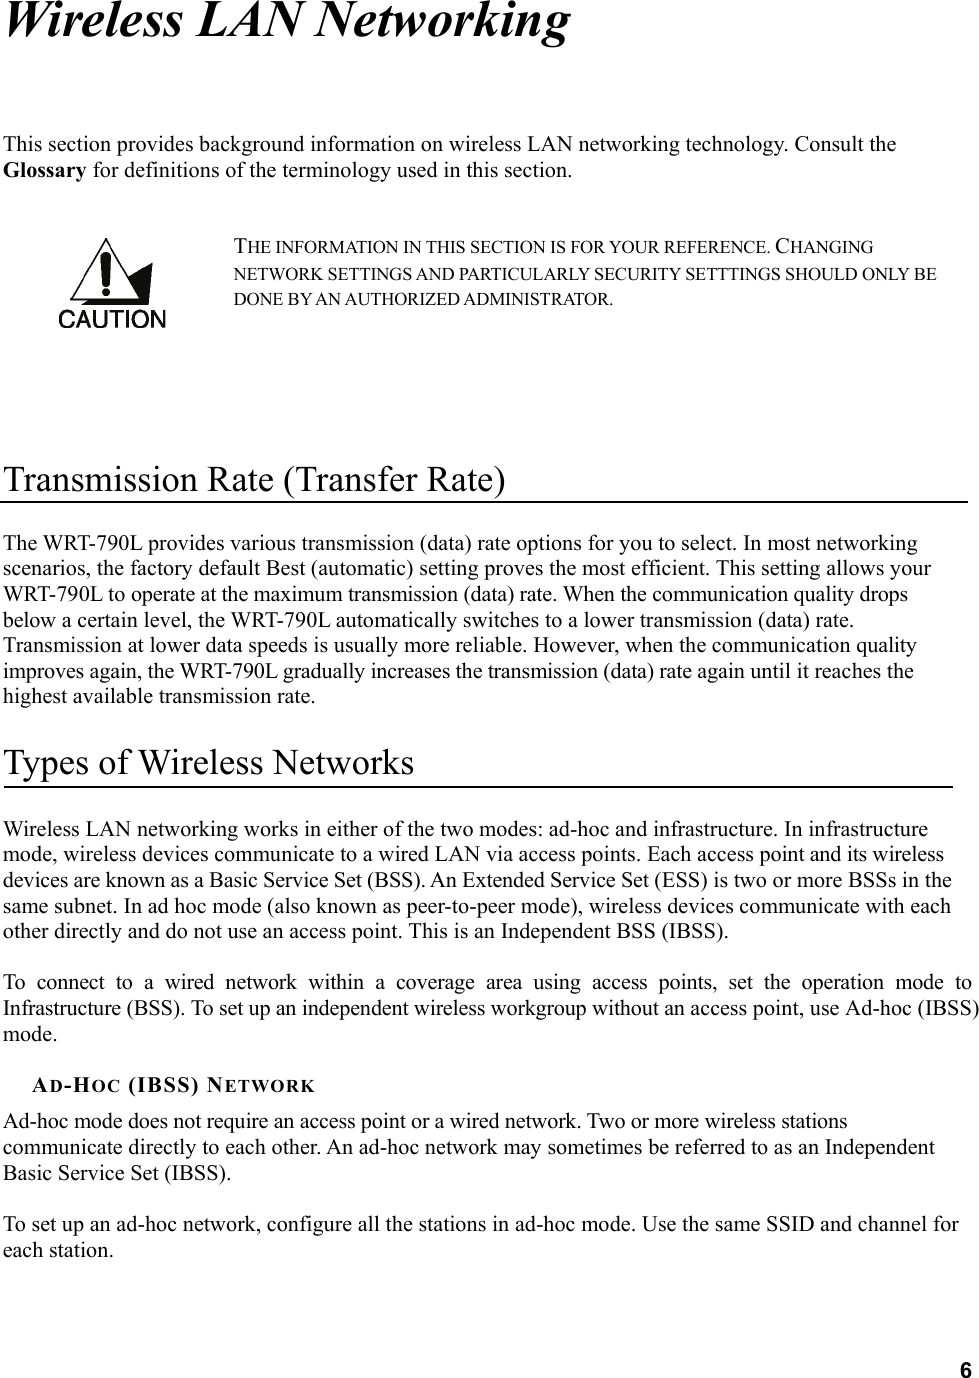  6Wireless LAN Networking This section provides background information on wireless LAN networking technology. Consult the Glossary for definitions of the terminology used in this section. THE INFORMATION IN THIS SECTION IS FOR YOUR REFERENCE. CHANGING NETWORK SETTINGS AND PARTICULARLY SECURITY SETTTINGS SHOULD ONLY BE DONE BY AN AUTHORIZED ADMINISTRATOR.   Transmission Rate (Transfer Rate) The WRT-790L provides various transmission (data) rate options for you to select. In most networking scenarios, the factory default Best (automatic) setting proves the most efficient. This setting allows your WRT-790L to operate at the maximum transmission (data) rate. When the communication quality drops below a certain level, the WRT-790L automatically switches to a lower transmission (data) rate. Transmission at lower data speeds is usually more reliable. However, when the communication quality improves again, the WRT-790L gradually increases the transmission (data) rate again until it reaches the highest available transmission rate. Types of Wireless Networks Wireless LAN networking works in either of the two modes: ad-hoc and infrastructure. In infrastructure mode, wireless devices communicate to a wired LAN via access points. Each access point and its wireless devices are known as a Basic Service Set (BSS). An Extended Service Set (ESS) is two or more BSSs in the same subnet. In ad hoc mode (also known as peer-to-peer mode), wireless devices communicate with each other directly and do not use an access point. This is an Independent BSS (IBSS).  To connect to a wired network within a coverage area using access points, set the operation mode to Infrastructure (BSS). To set up an independent wireless workgroup without an access point, use Ad-hoc (IBSS) mode.  AD-HOC (IBSS) NETWORK Ad-hoc mode does not require an access point or a wired network. Two or more wireless stations communicate directly to each other. An ad-hoc network may sometimes be referred to as an Independent Basic Service Set (IBSS).  To set up an ad-hoc network, configure all the stations in ad-hoc mode. Use the same SSID and channel for each station.  